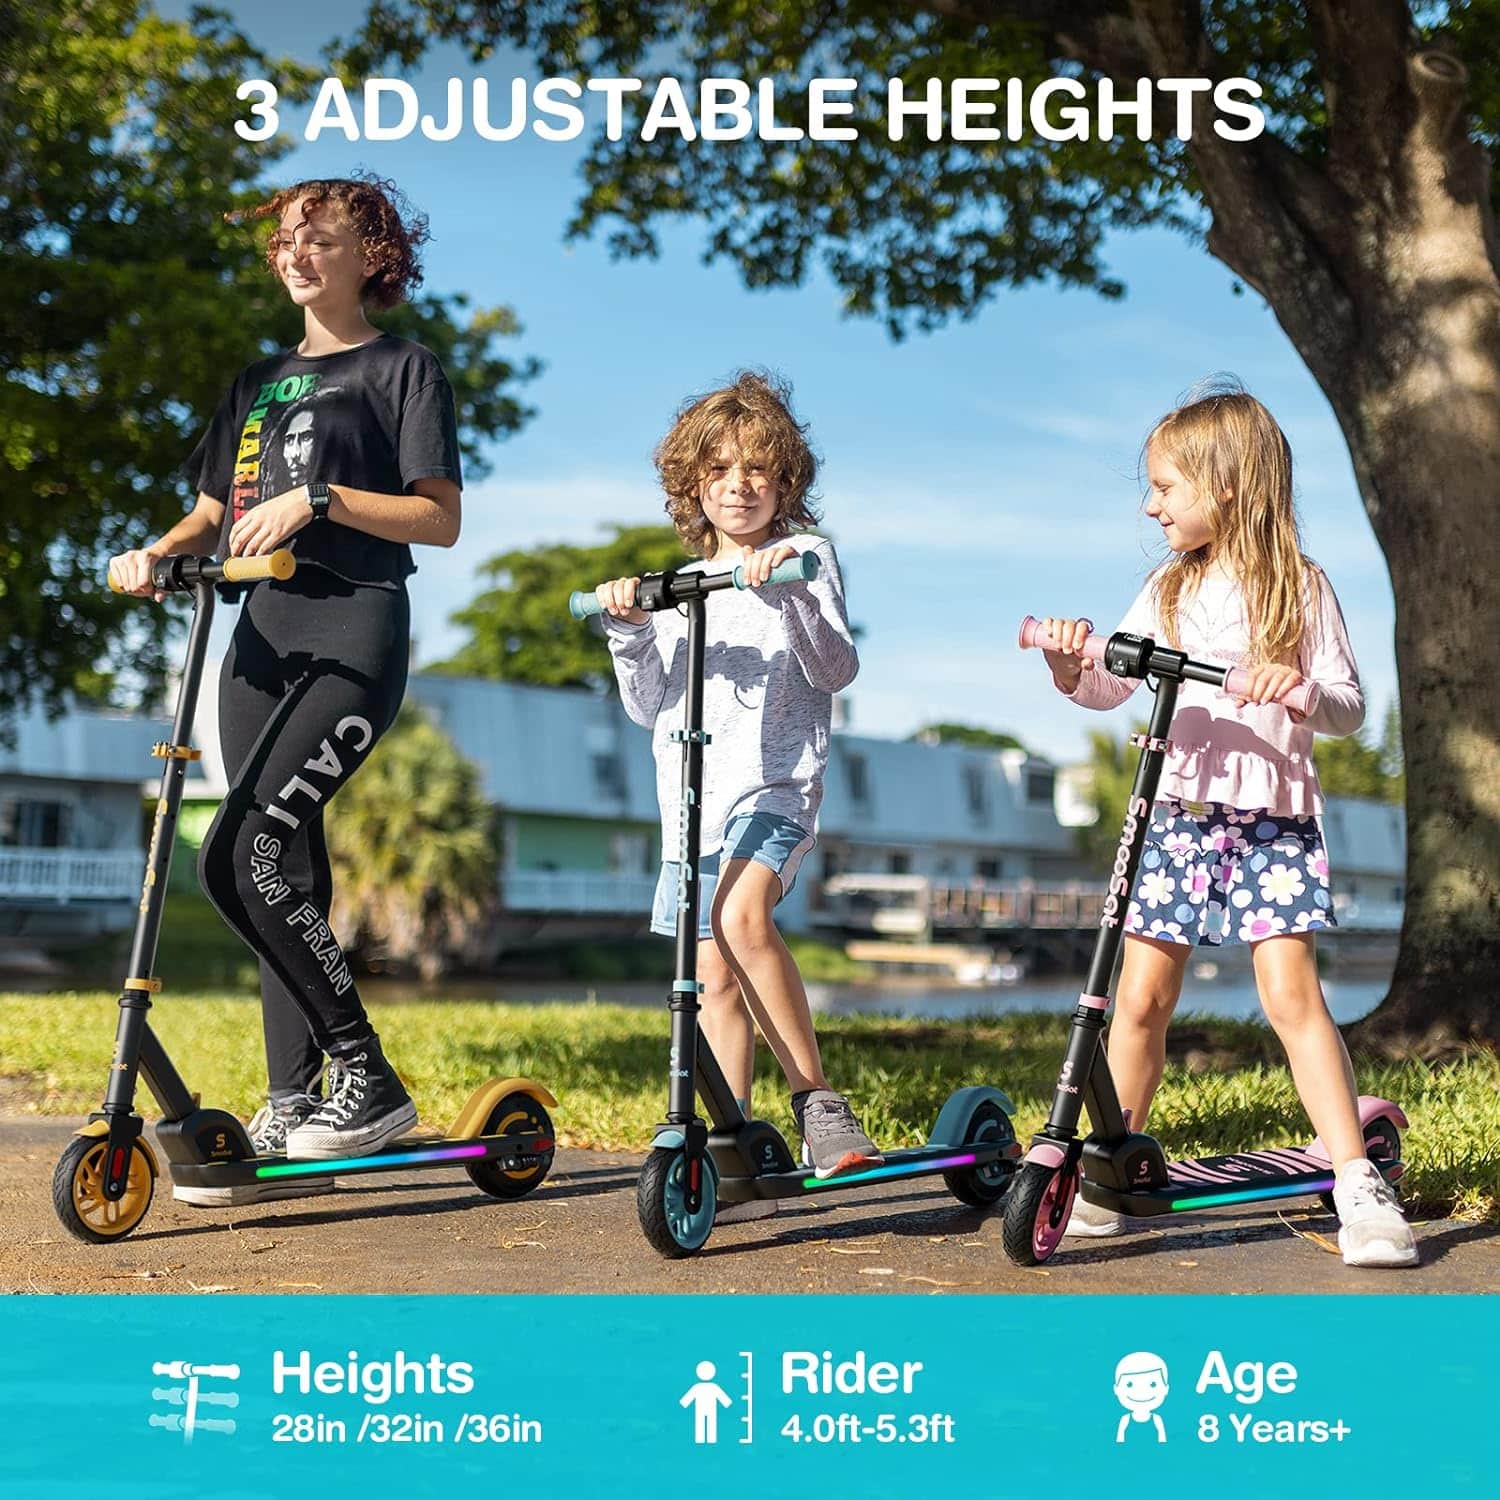 SmooSat Apex Electric Scooter for Kids: A Fun and Safe Ride